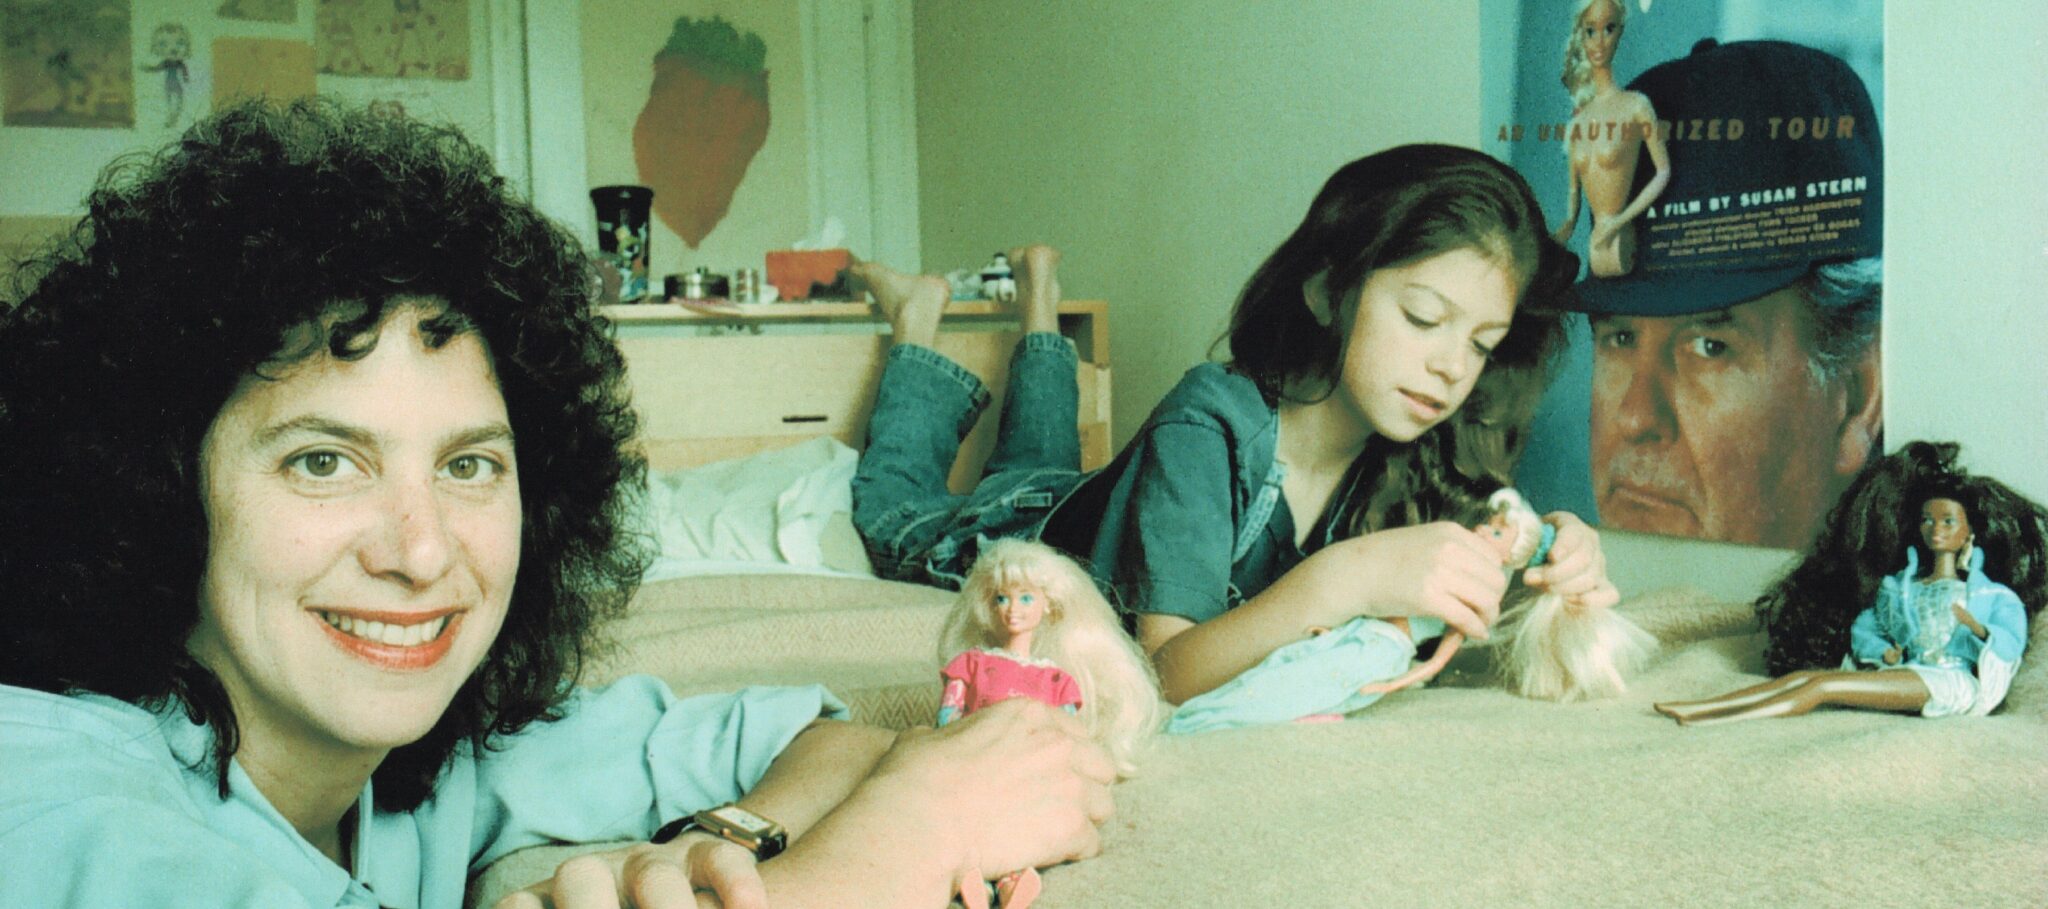 Susan and her daughter, Nora, playing with Barbies